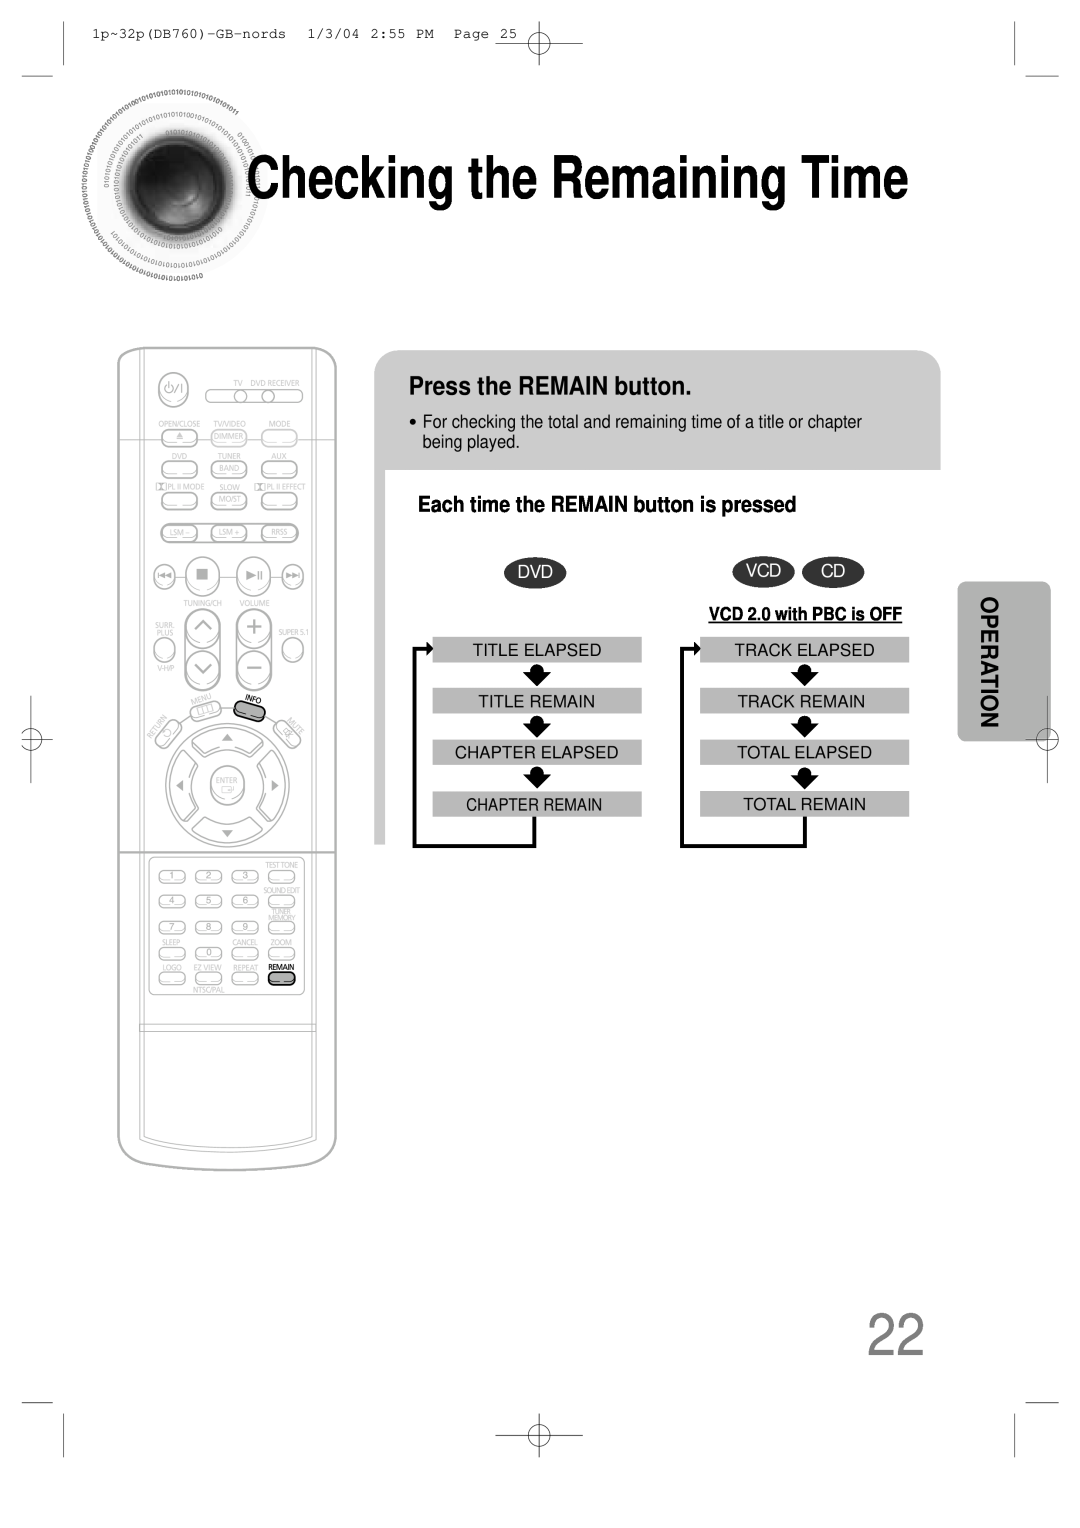 Samsung HTDB760TTH/XSG manual Checking the Remaining Time, Press the REMAIN button, Each time the REMAIN button is pressed 